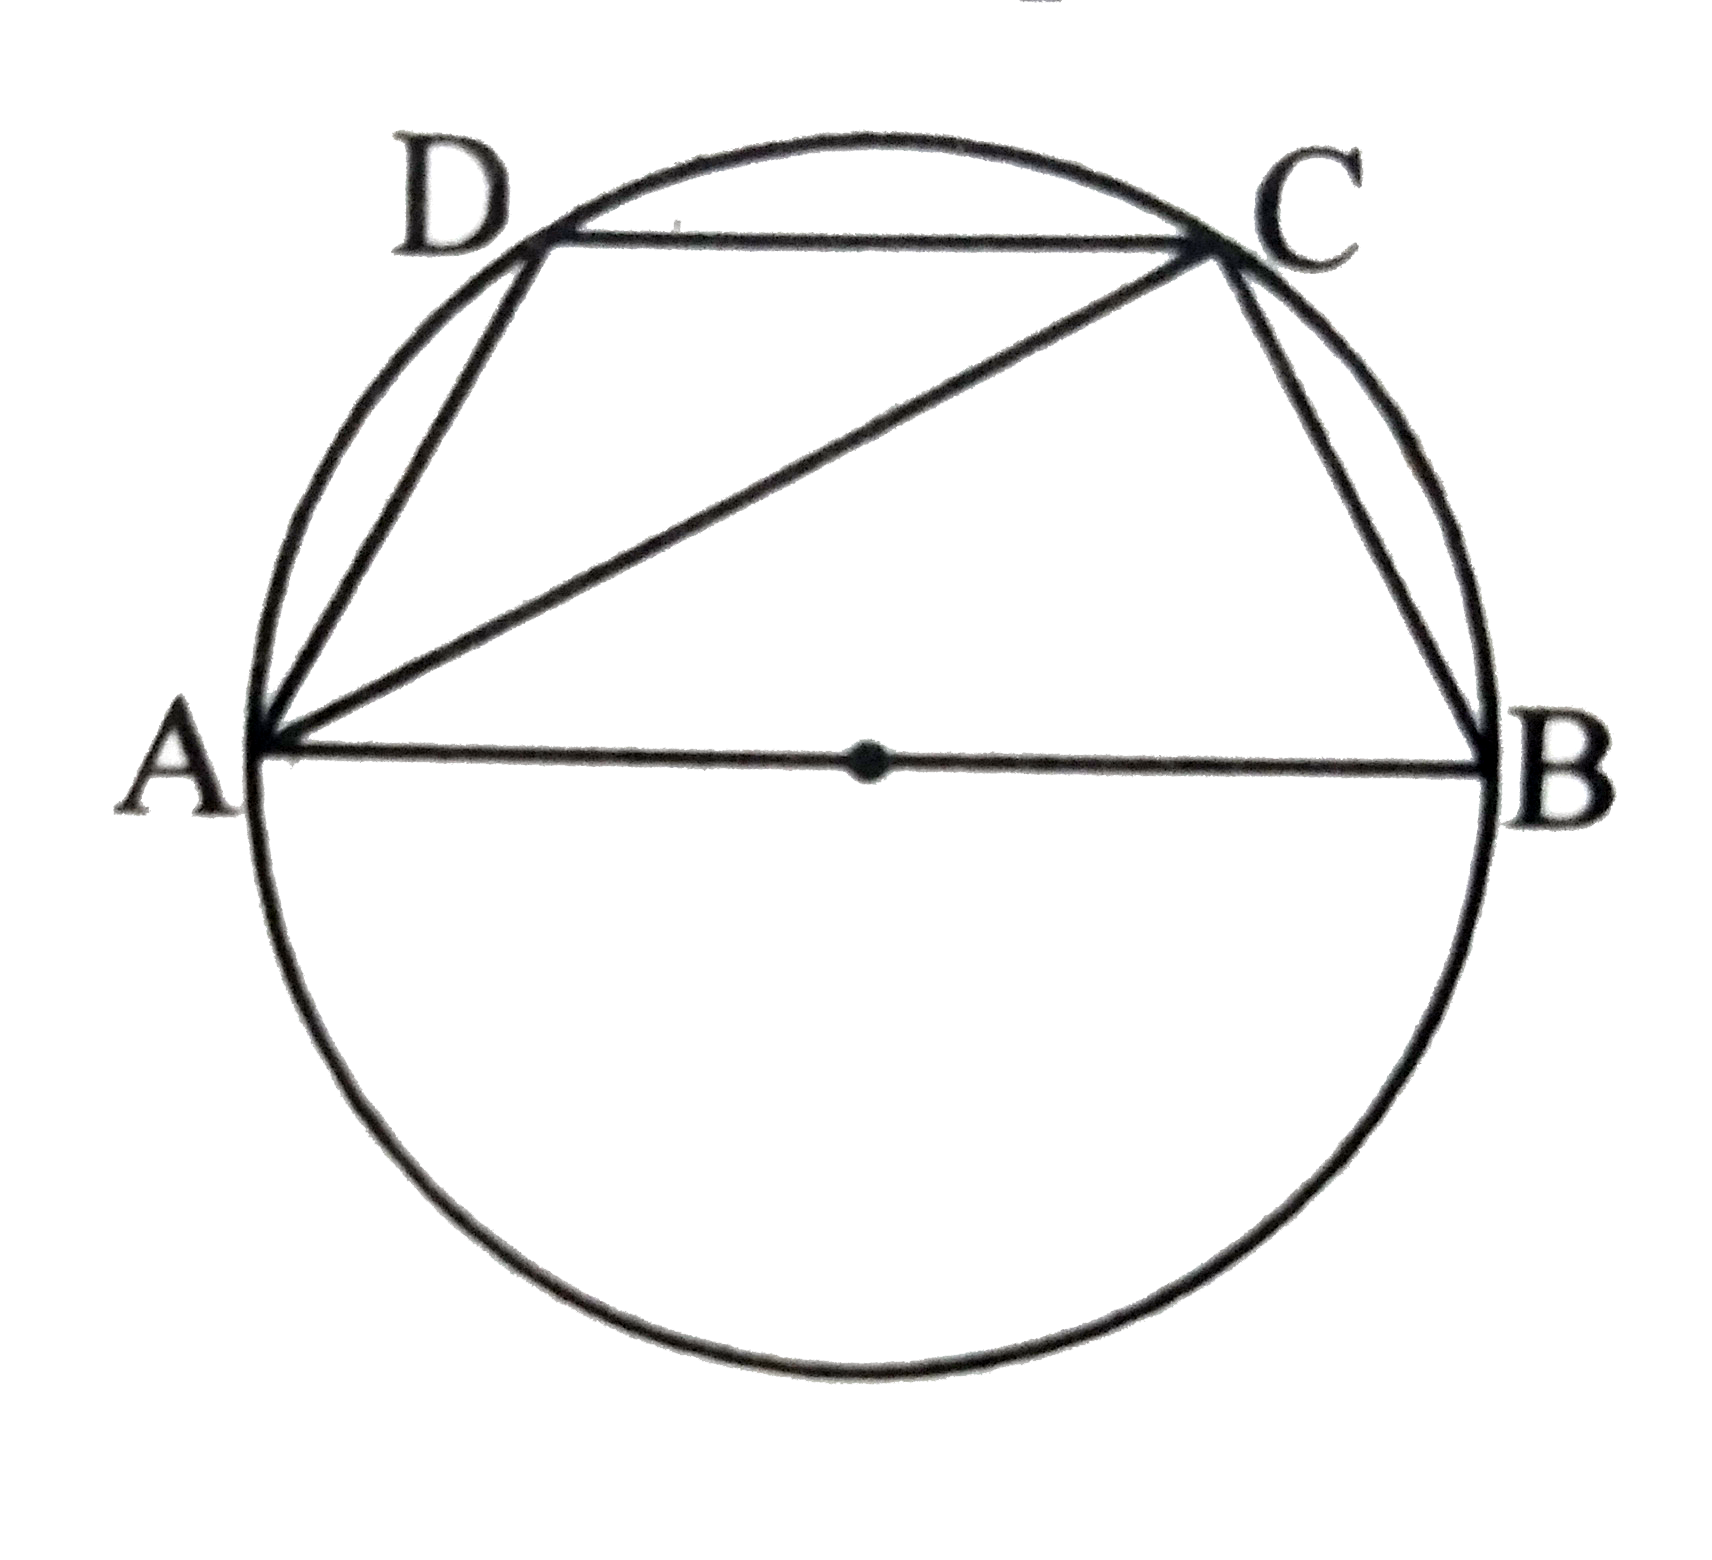 In the figure square ABCD is a cyclic quadrilateral.Seg AB is a diameter.   If angleADC=120^@,  find the measure of angleBAC.